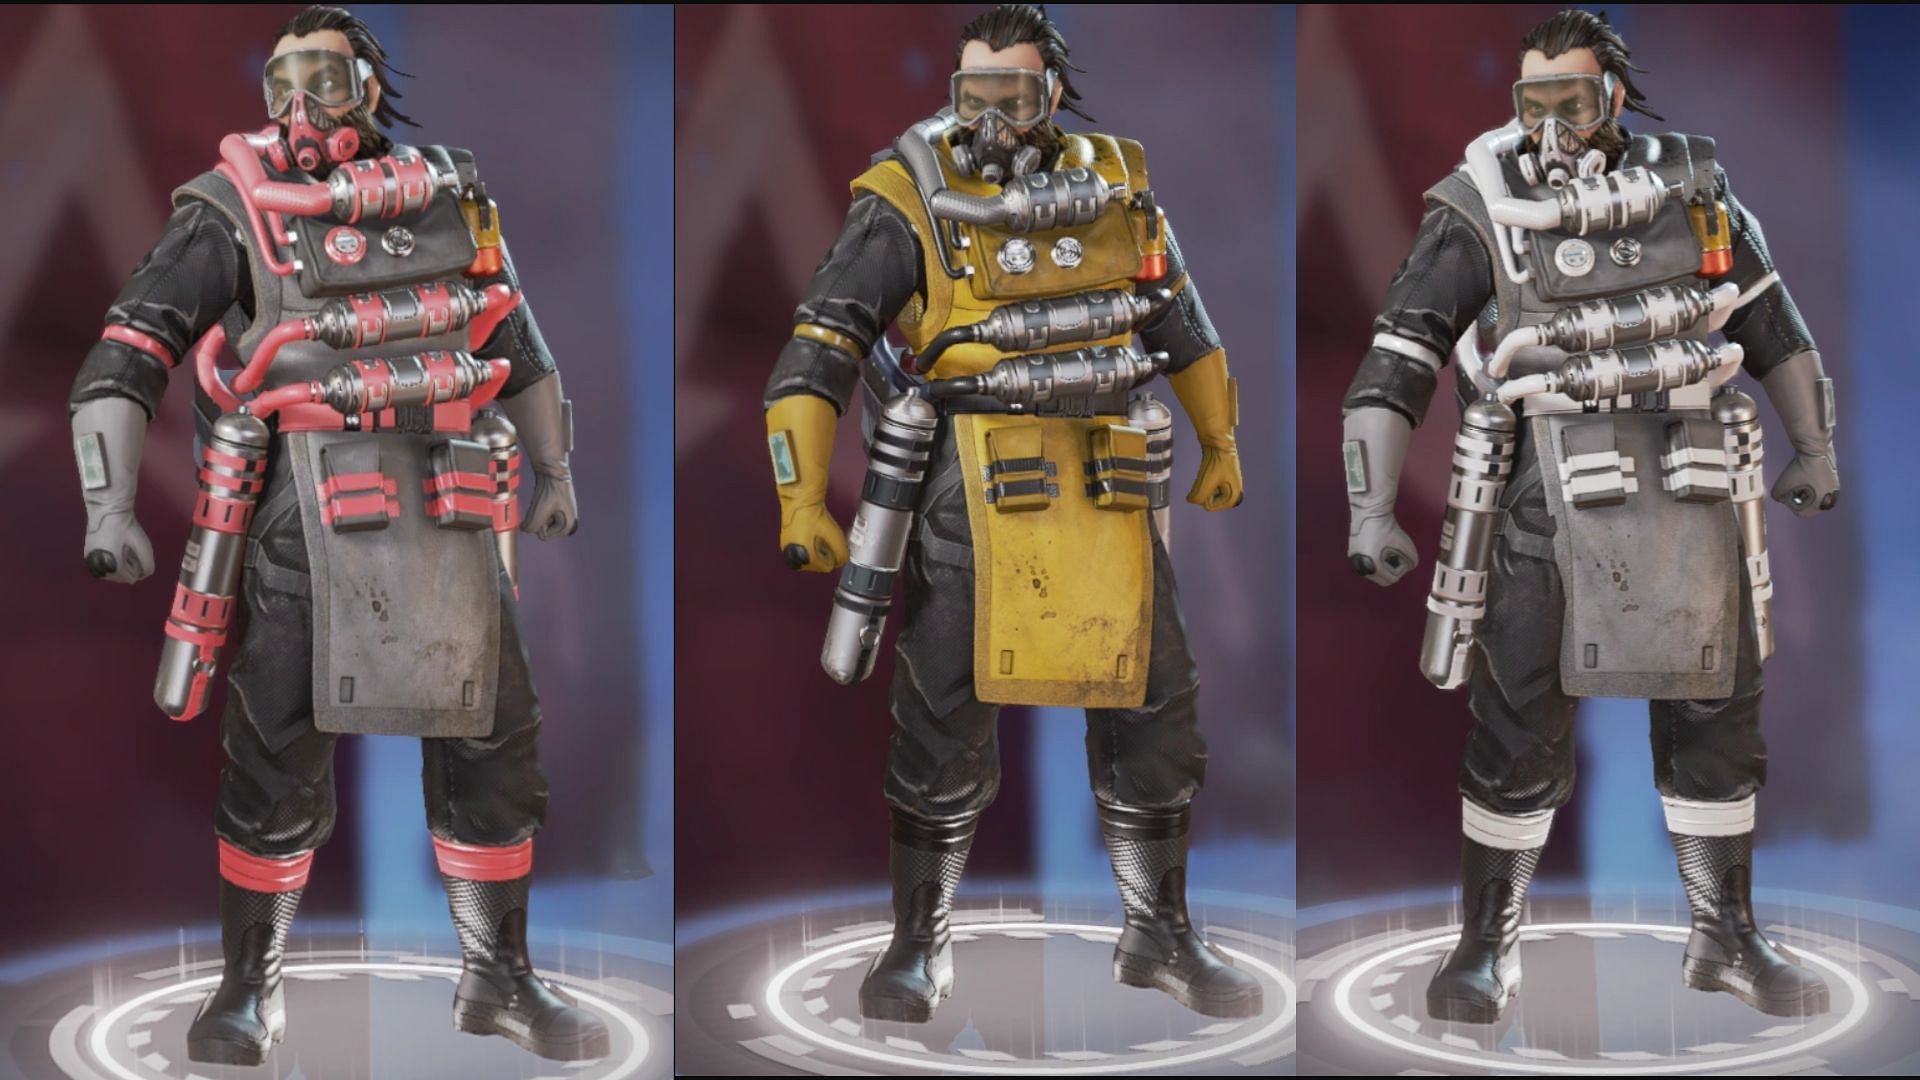 Common Caustic skins in Apex Legends (Image via Electronic Arts)